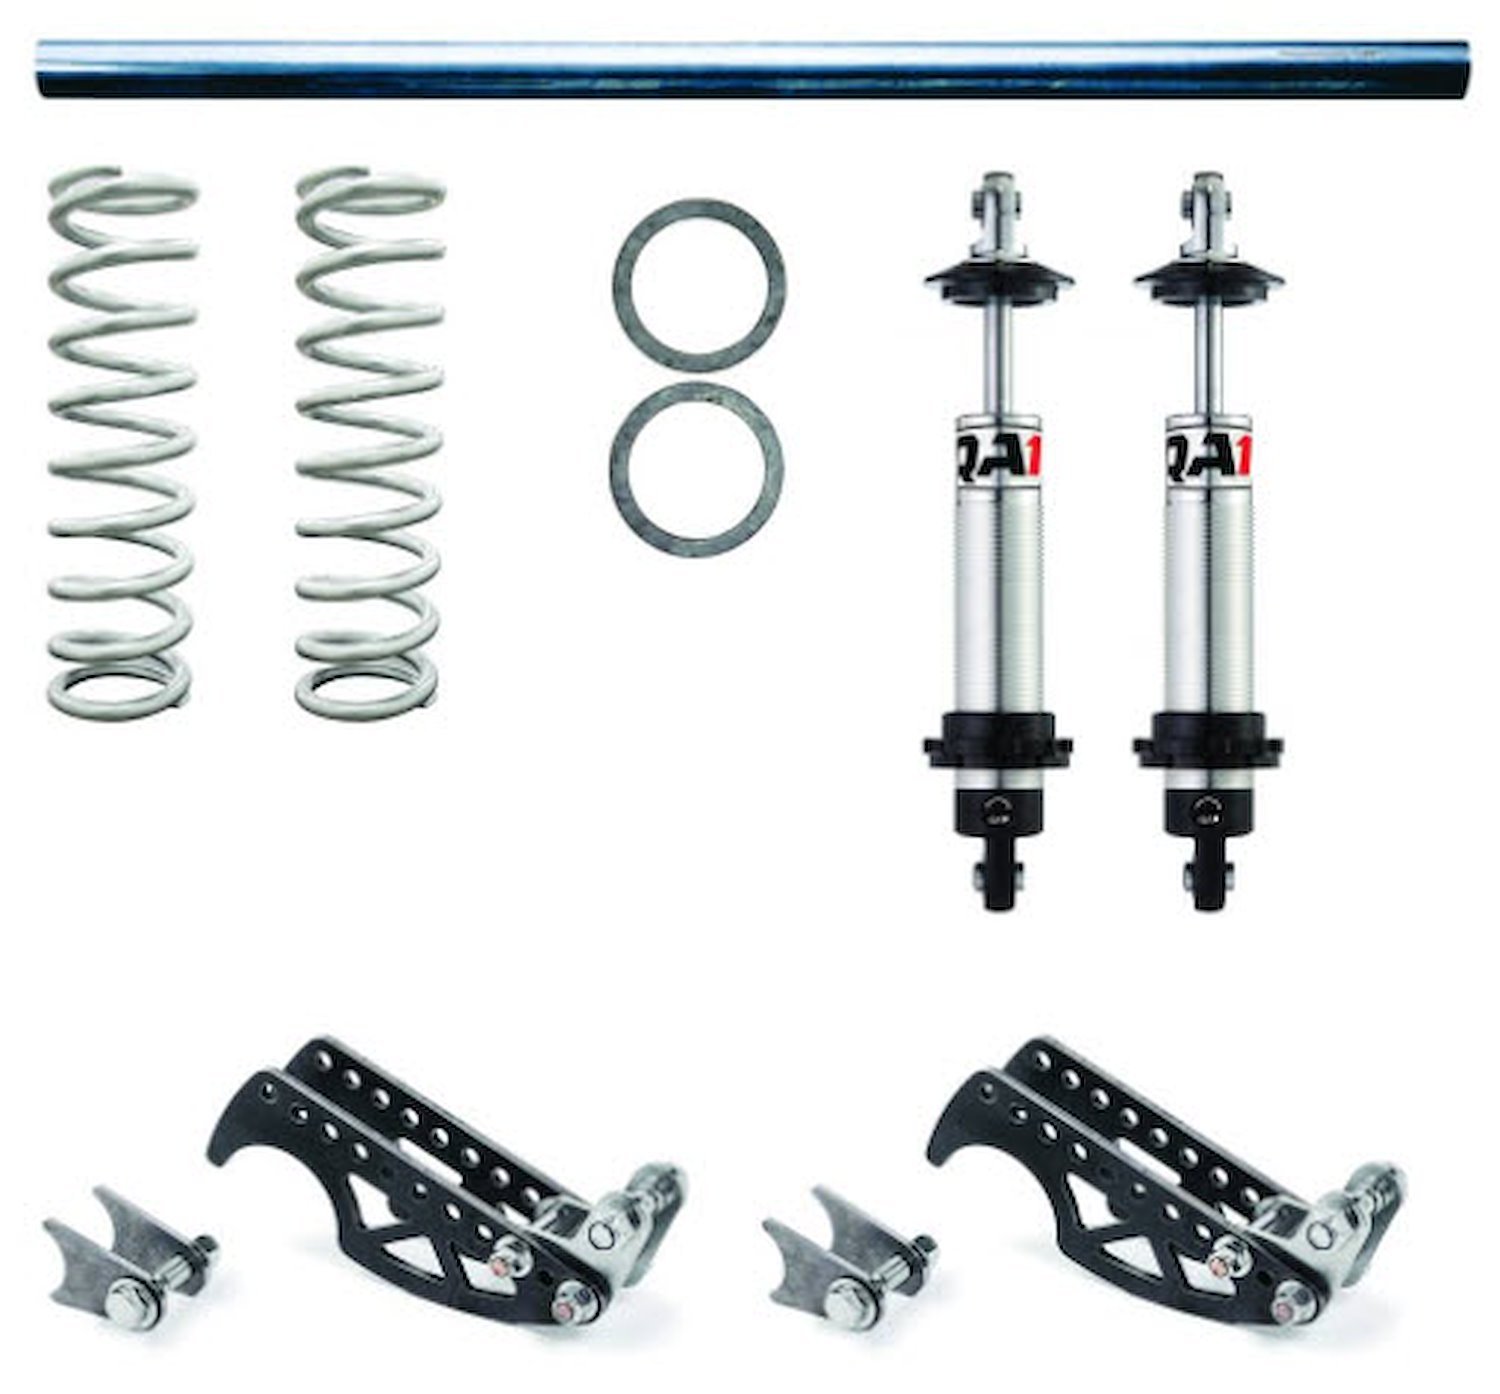 DS501-2001 Heavy-Duty Pro Rear Coil-Over Conversion System for 3 1/4 in. Axle Tubes w/Single-Adjustable Shocks & 200 lb. Springs